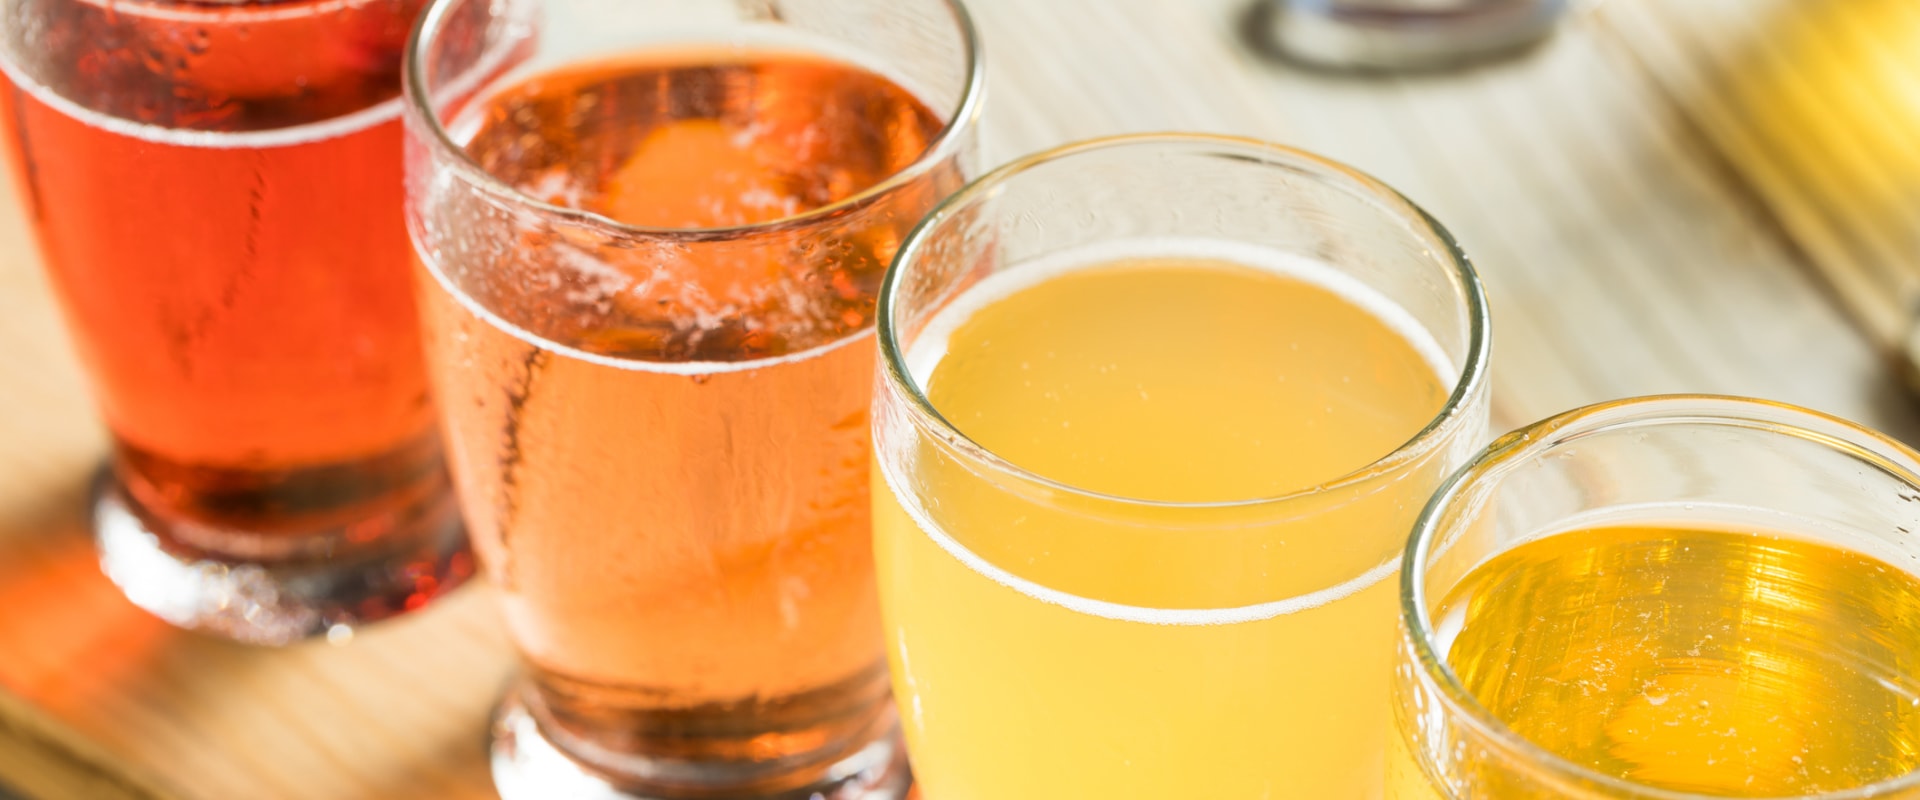 Why is cider better than beer?